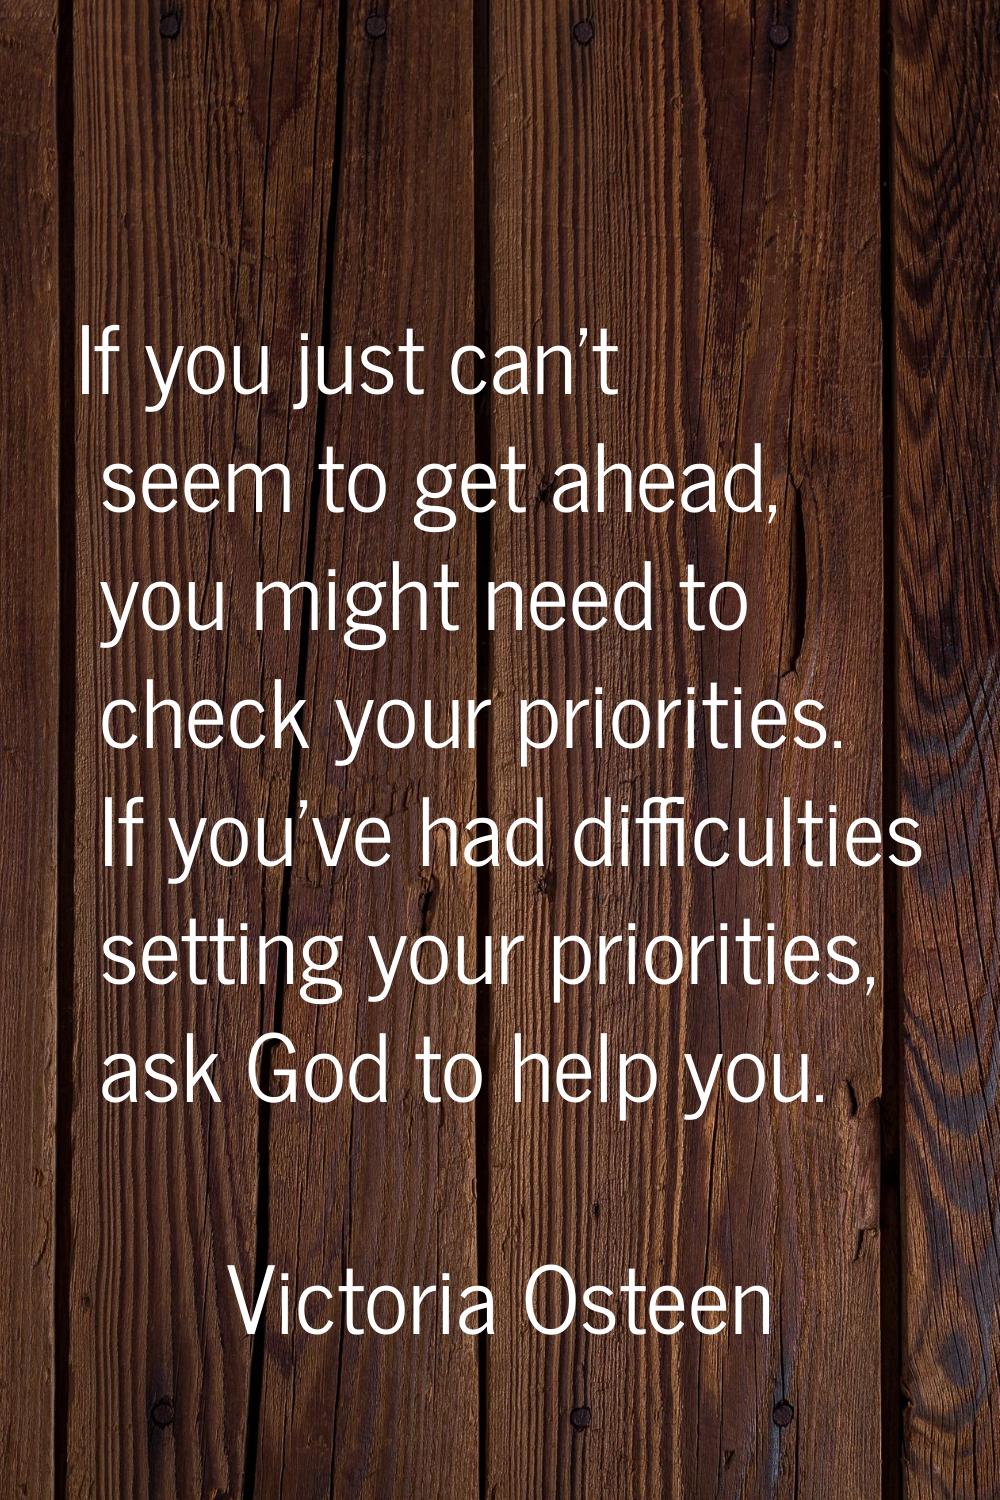 If you just can't seem to get ahead, you might need to check your priorities. If you've had difficu